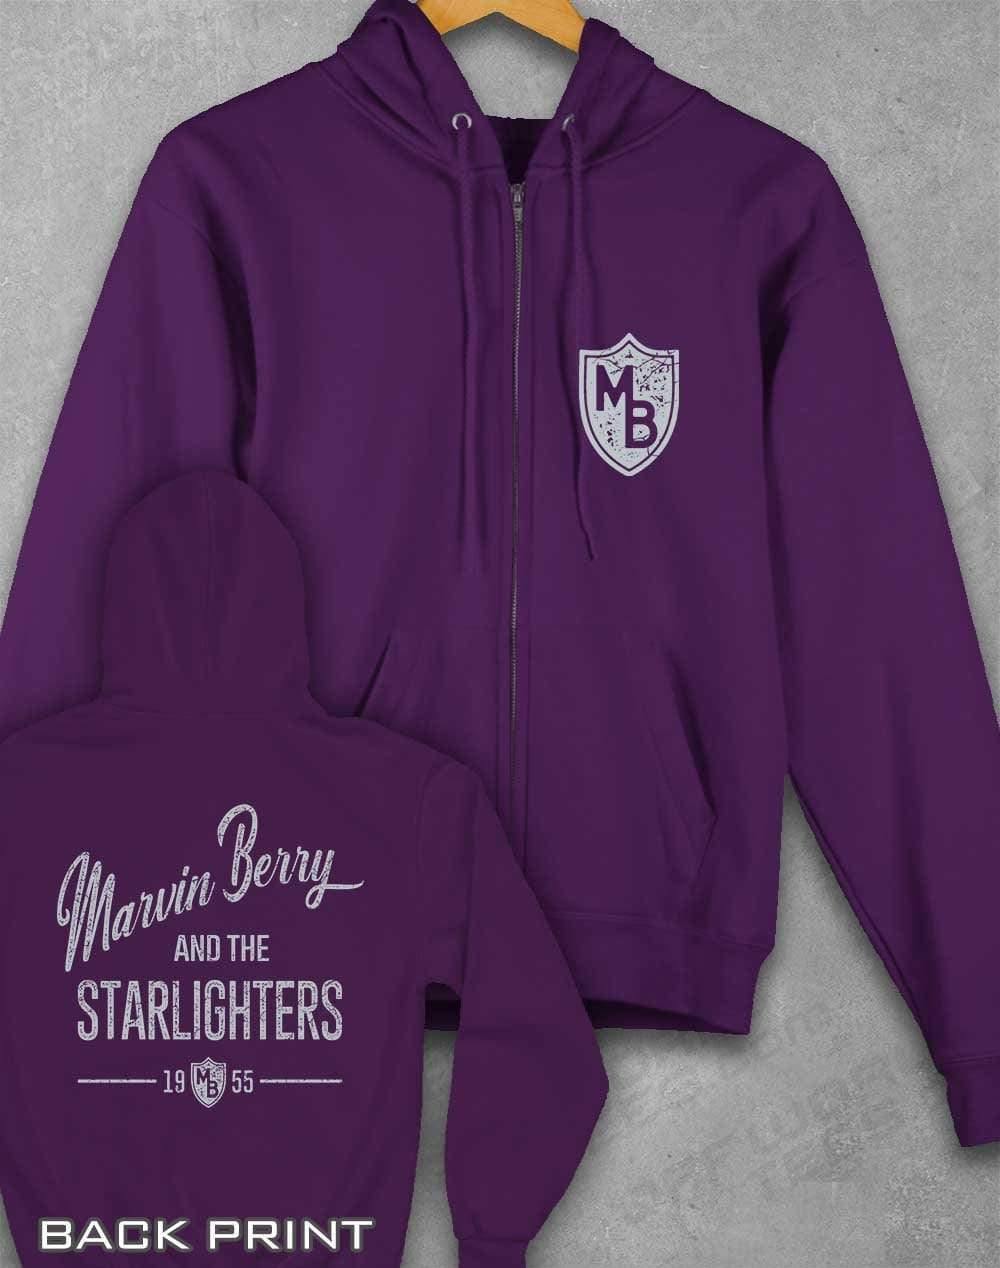 Marvin Berry and the Starlighters Ziphood XS / Purple  - Off World Tees